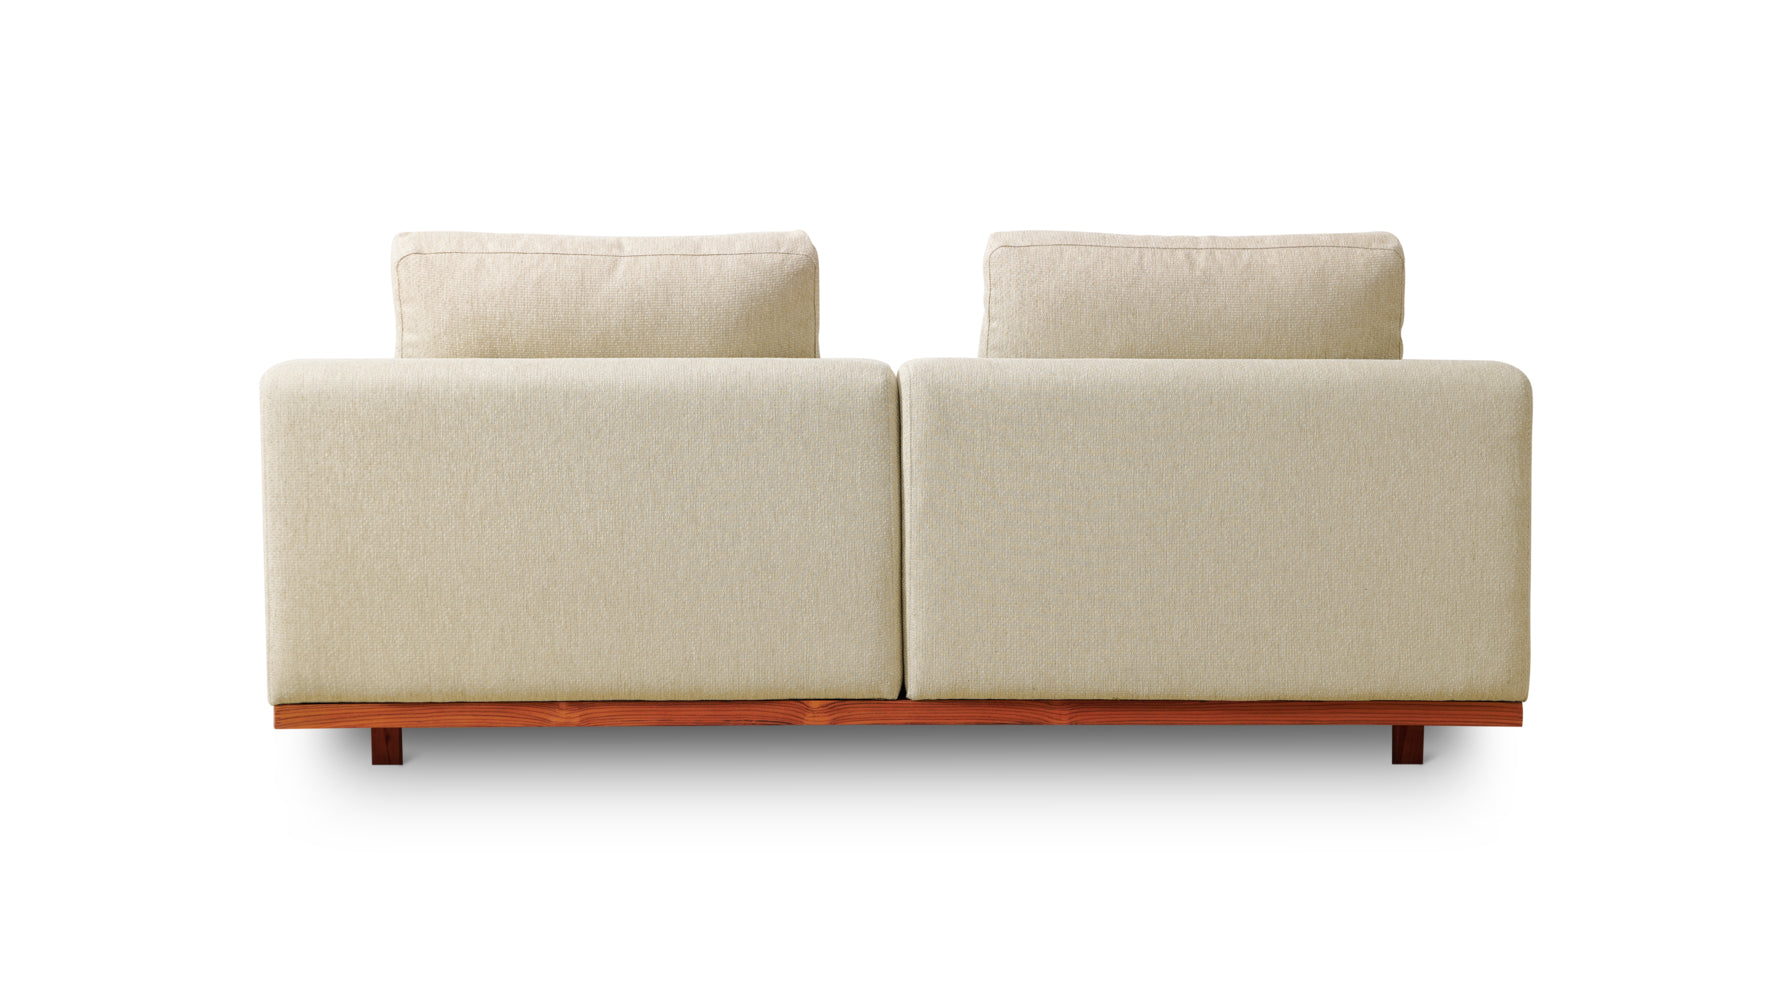 Sunny Days Outdoor Sofa, 2 Seater, Sandy - Image 4